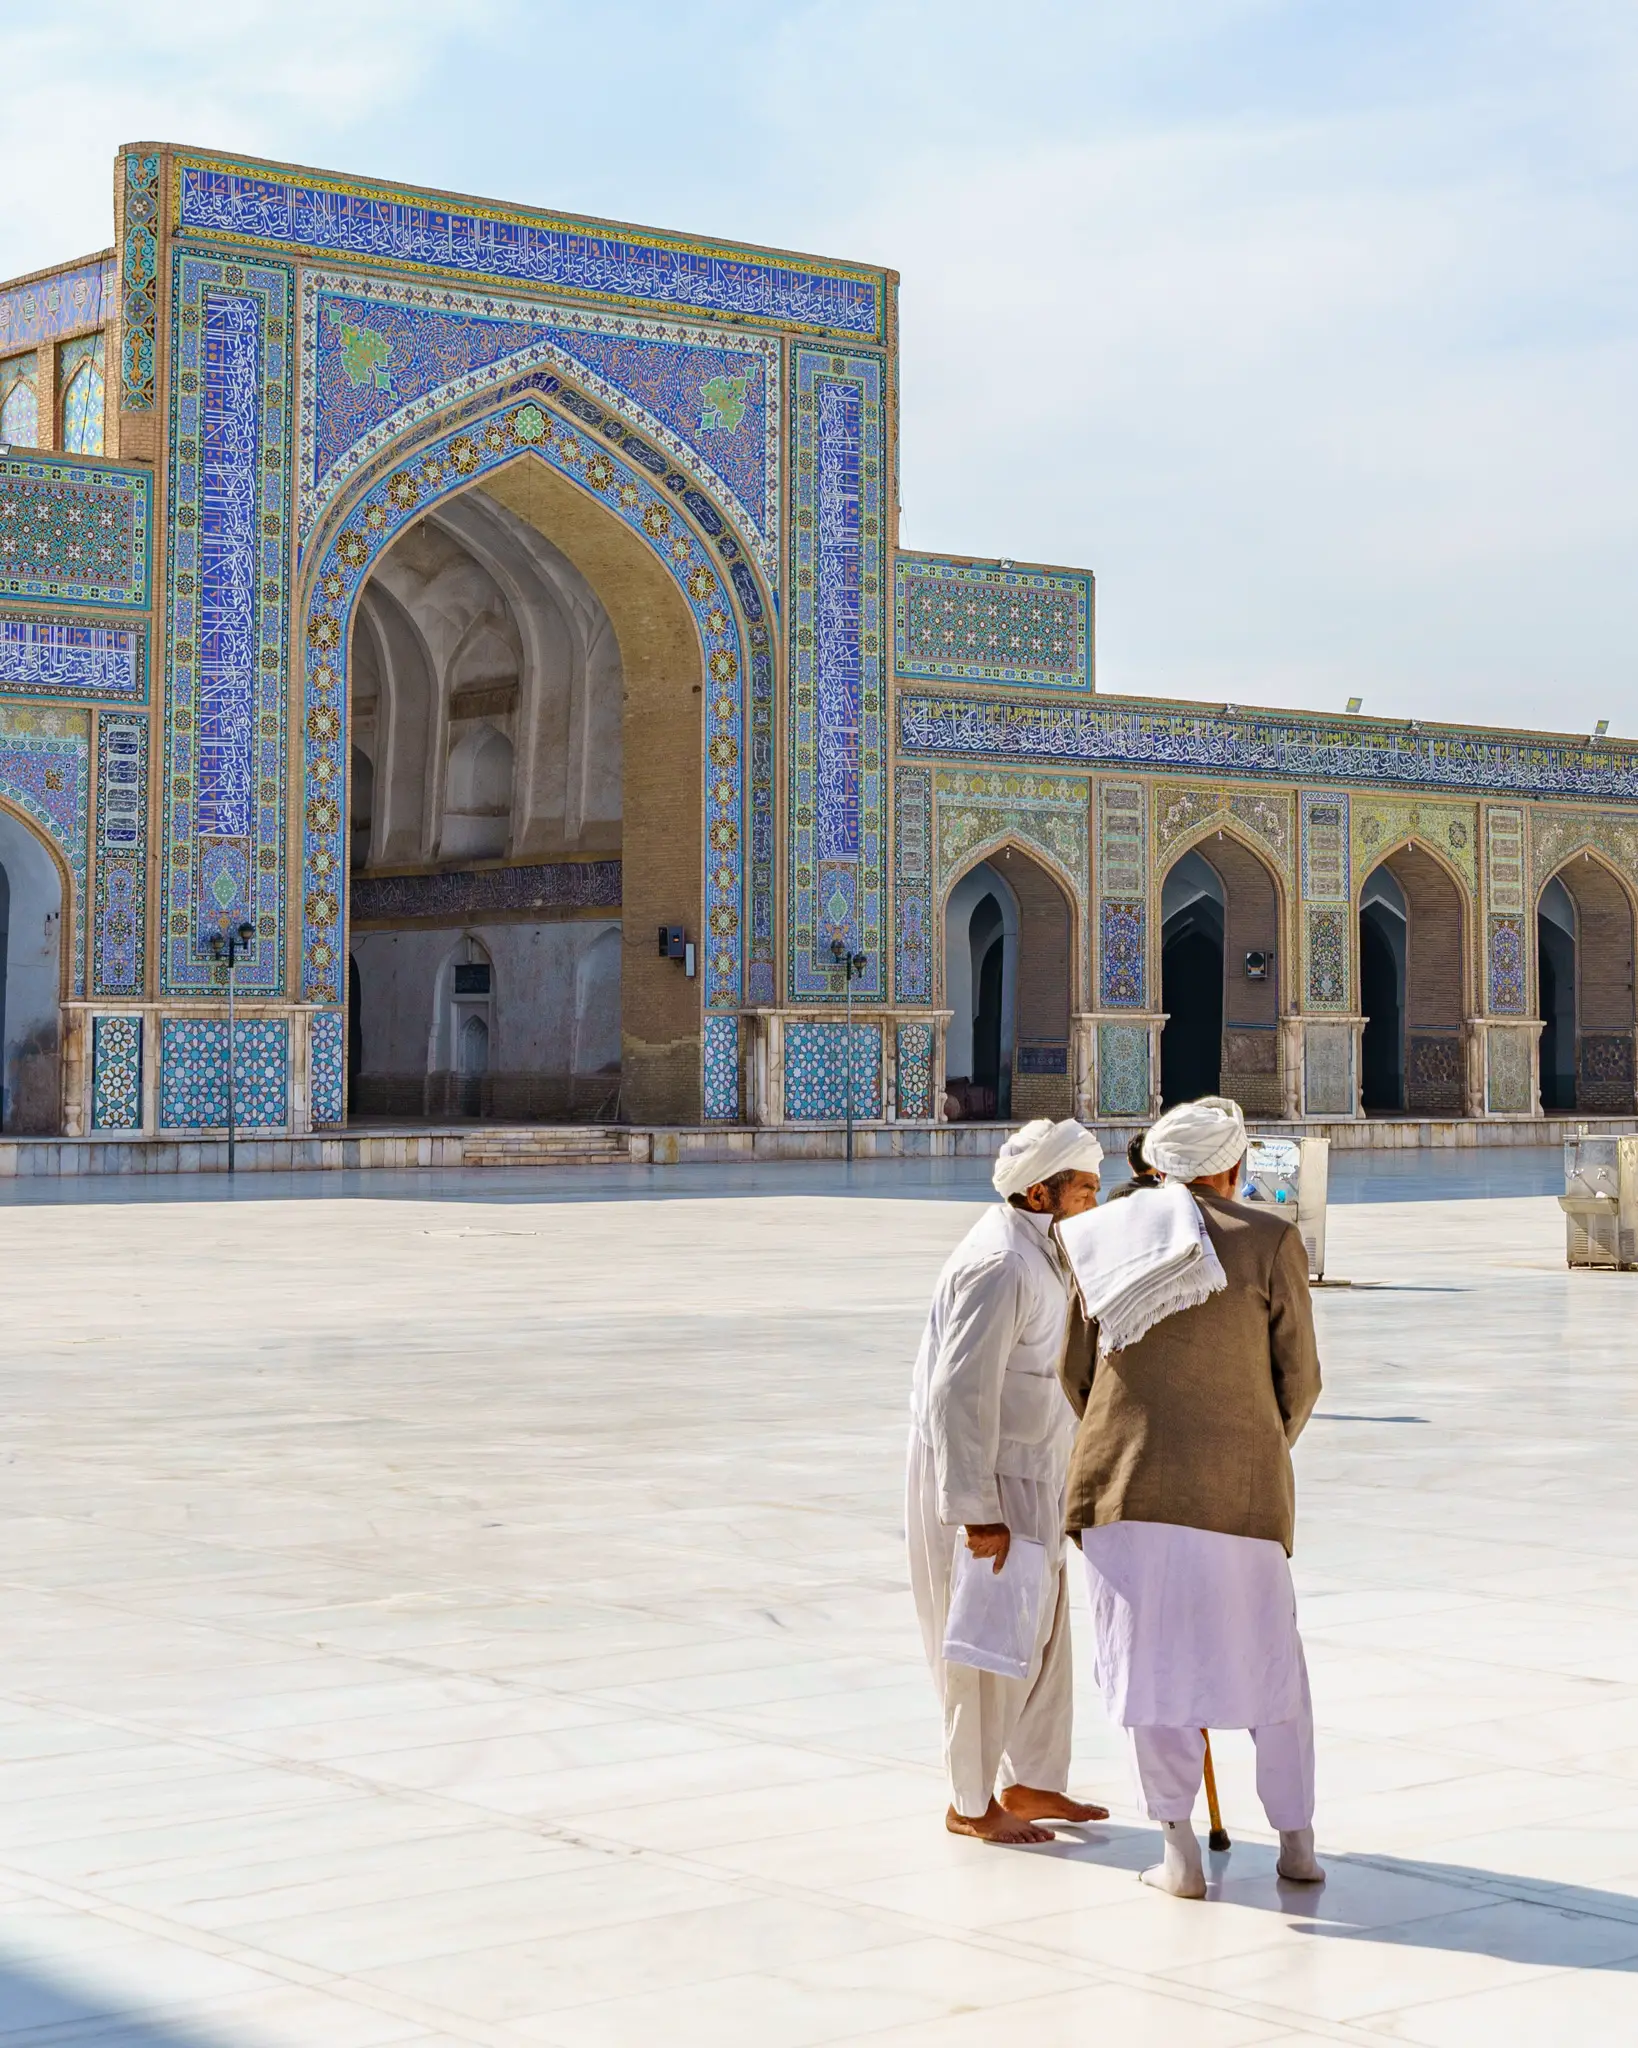 Men hanging out inside the Great Mosque of Herat